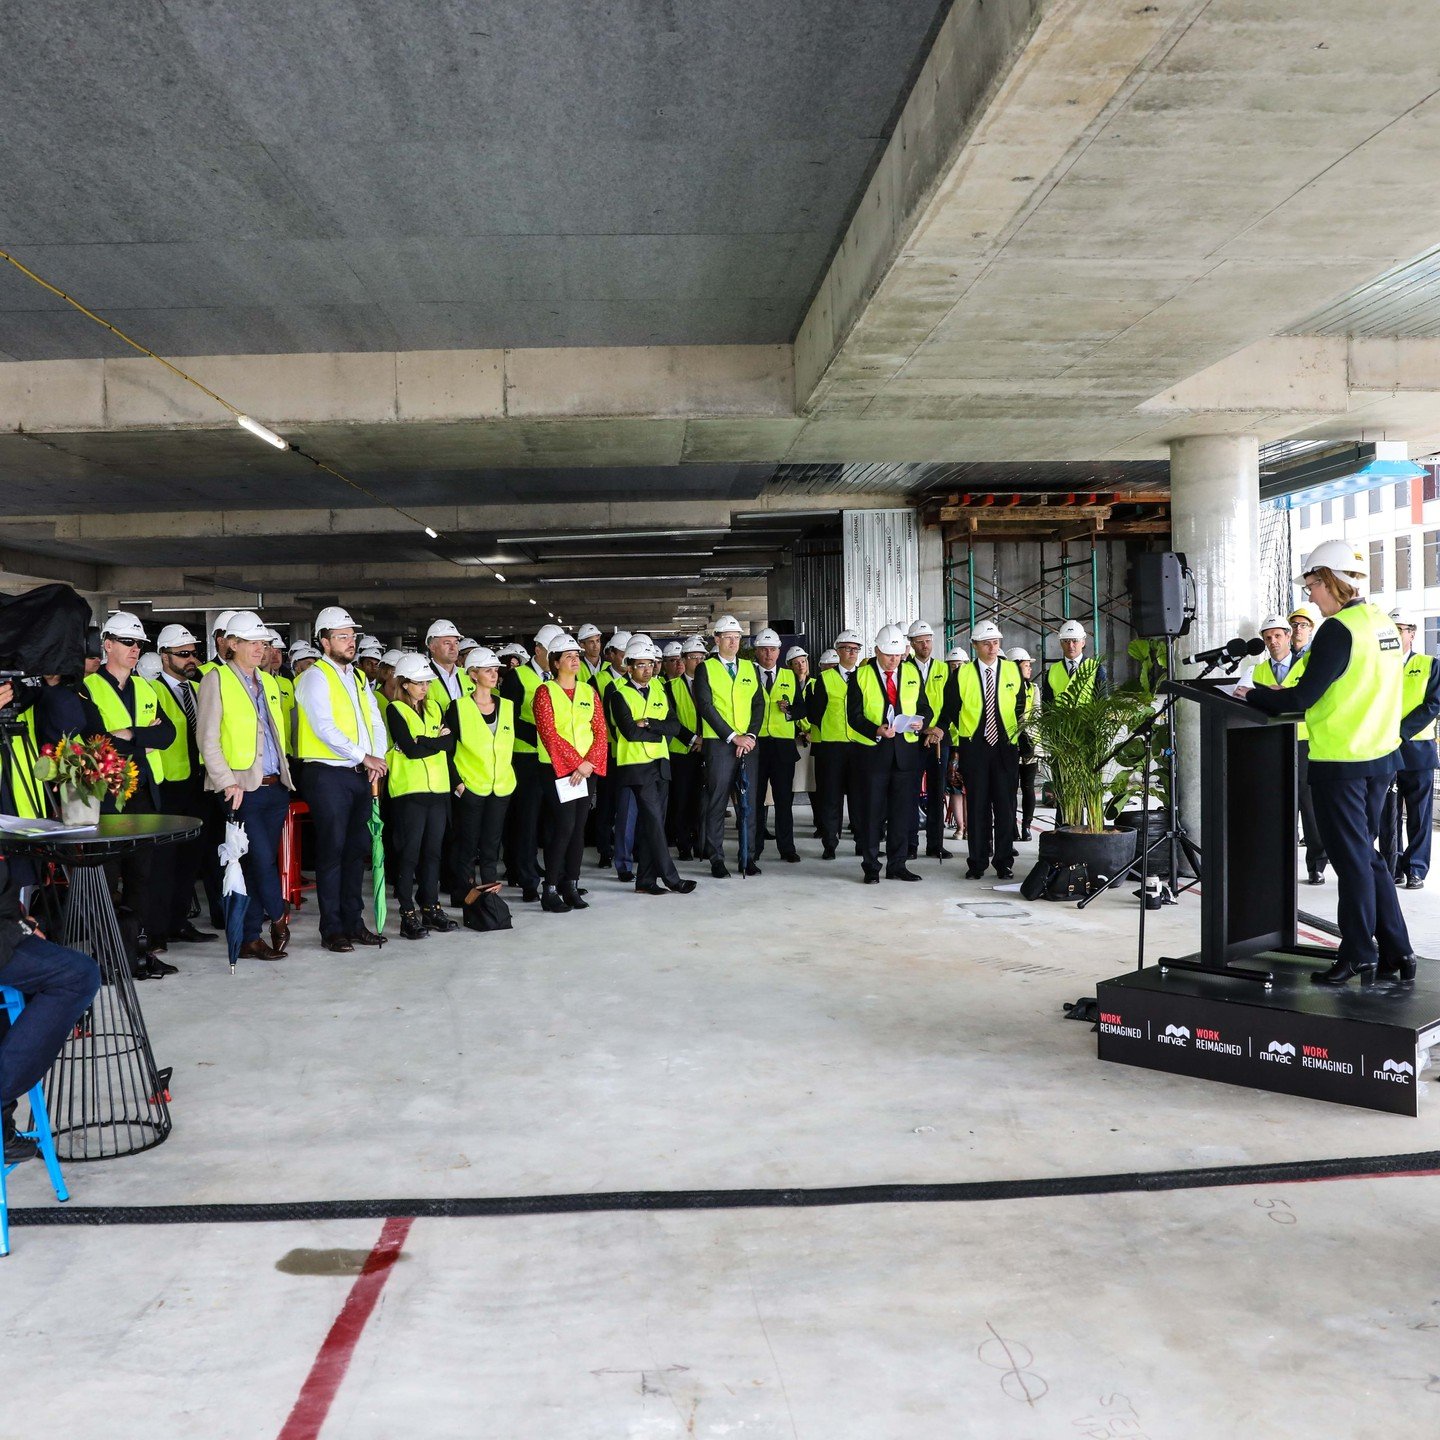 The Topping Out of &ldquo;Building One&rdquo; at Sydney&rsquo;s Australian Technology Park redevelopment in Redfern called for an &ldquo;Industrial Construction Chic&rdquo; look for our client @mirvac_portfolio and its fellow consortium members AMP C